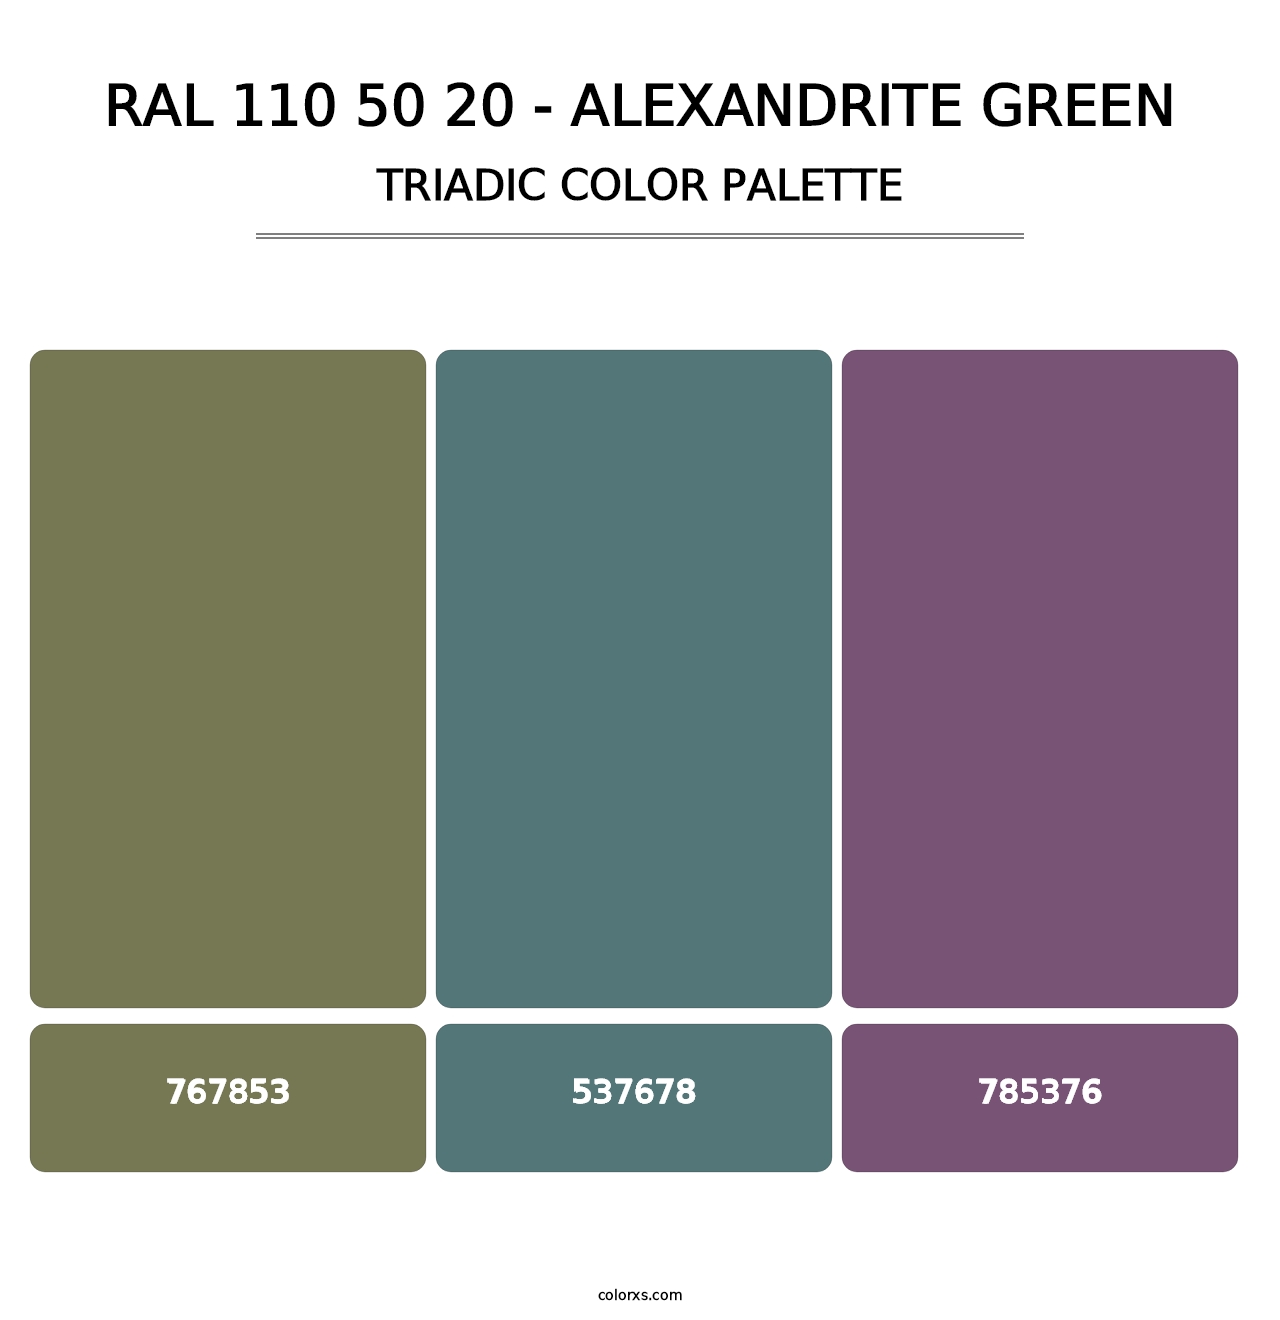 RAL 110 50 20 - Alexandrite Green - Triadic Color Palette